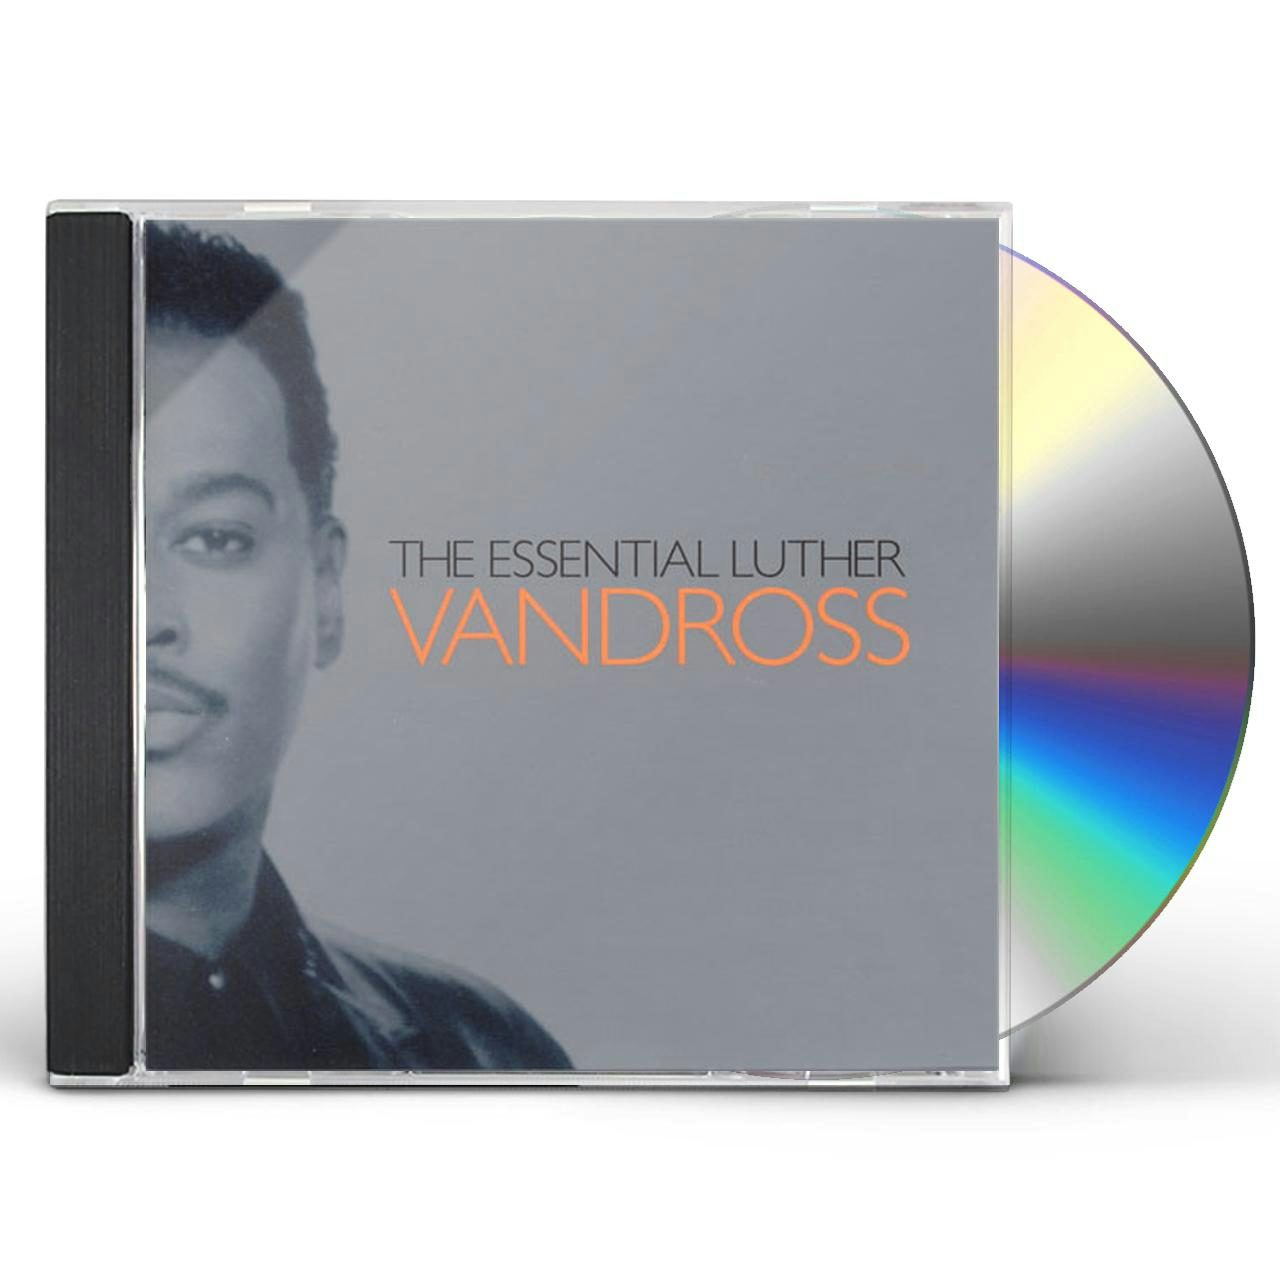 download free luther vandross songs